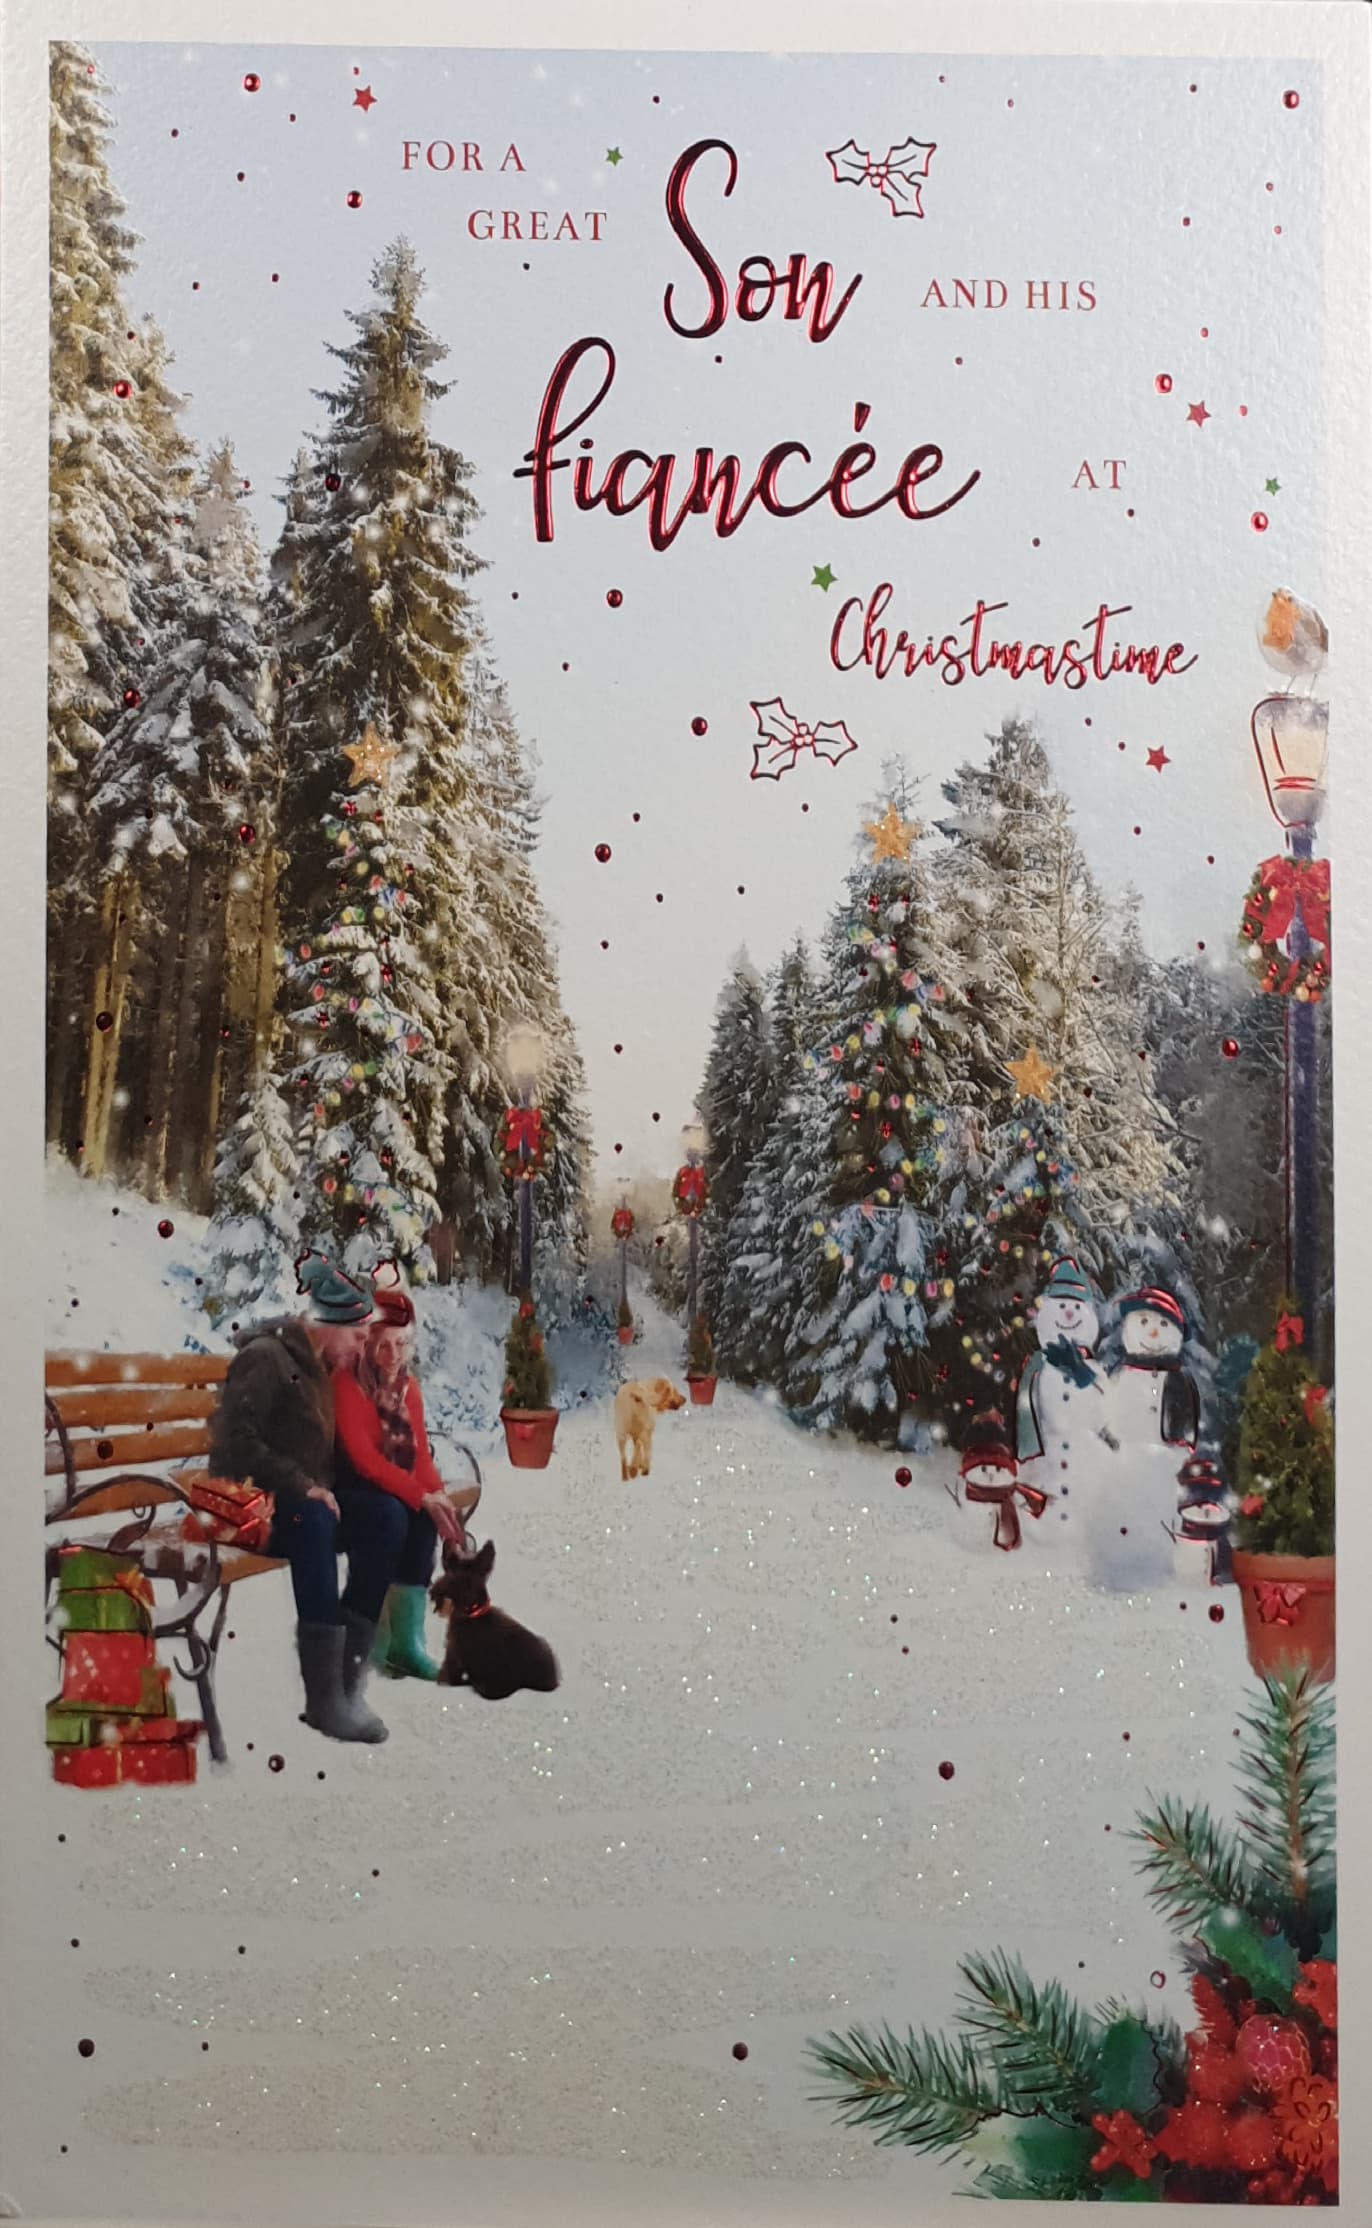 Son & His Fiancée Christmas Card - Couple sitting on Bench beside Forest